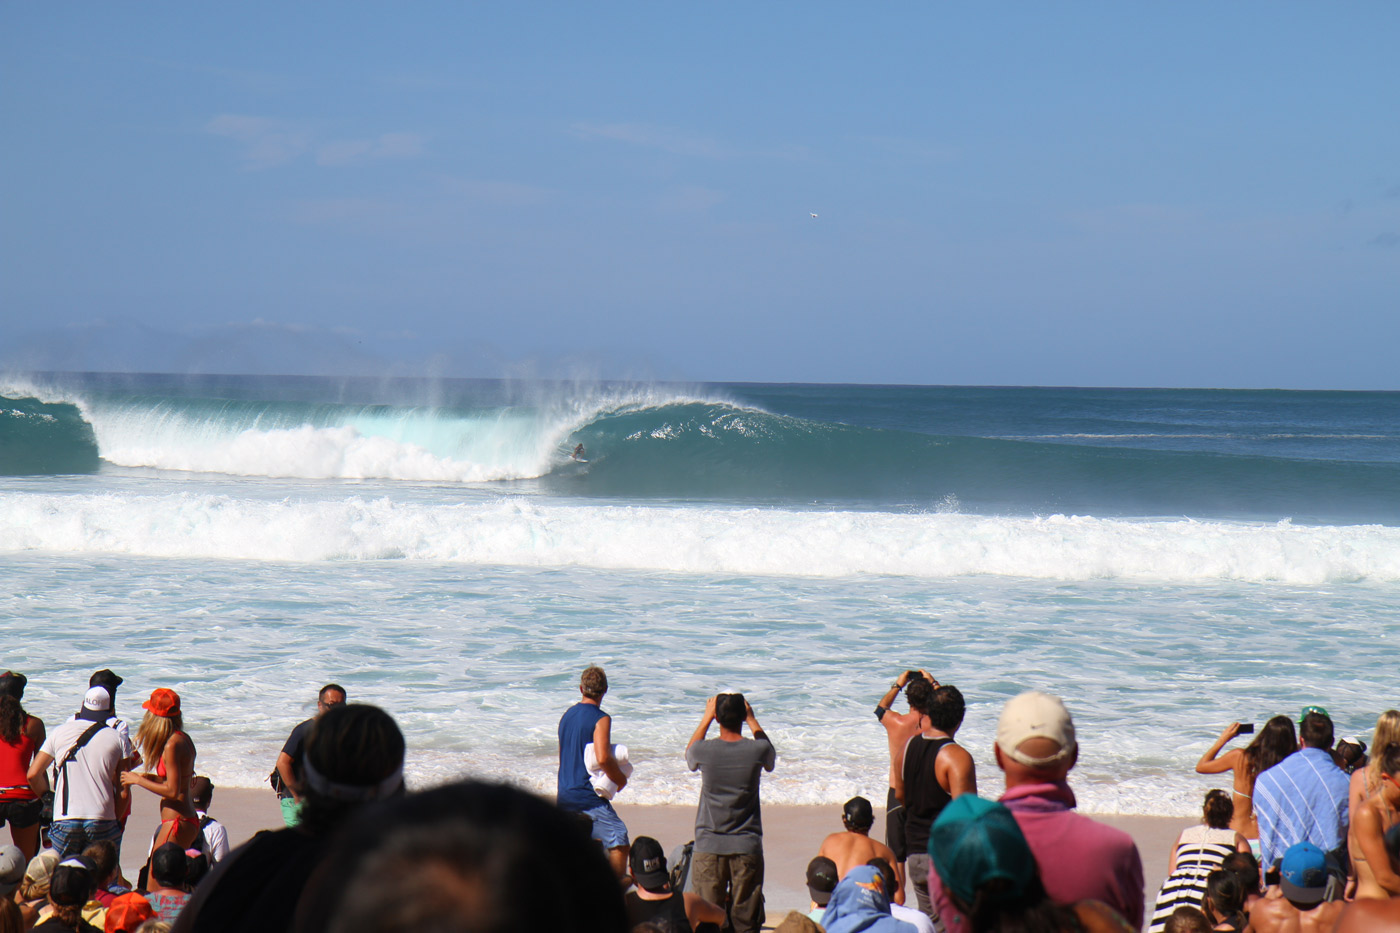 The famous Banzai Pipleline is just 3 miles away from your surfing lesson beach